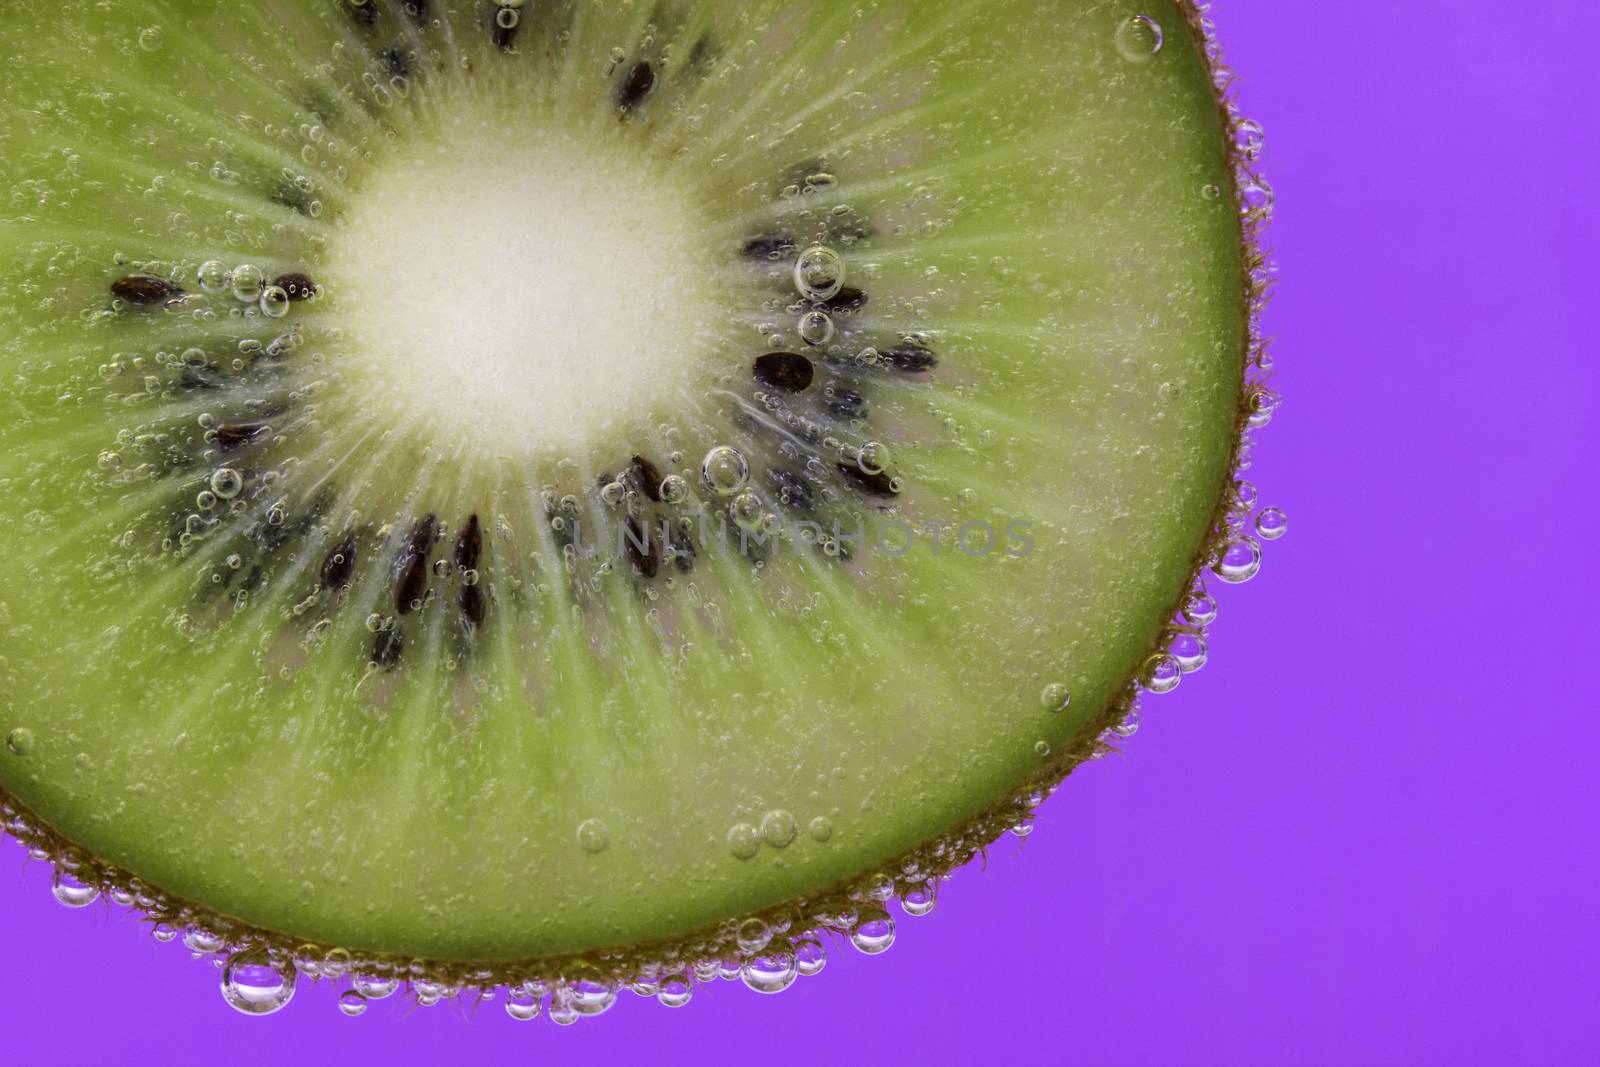 Closeup of a kiwi slice covered in water bubbles against a purple background